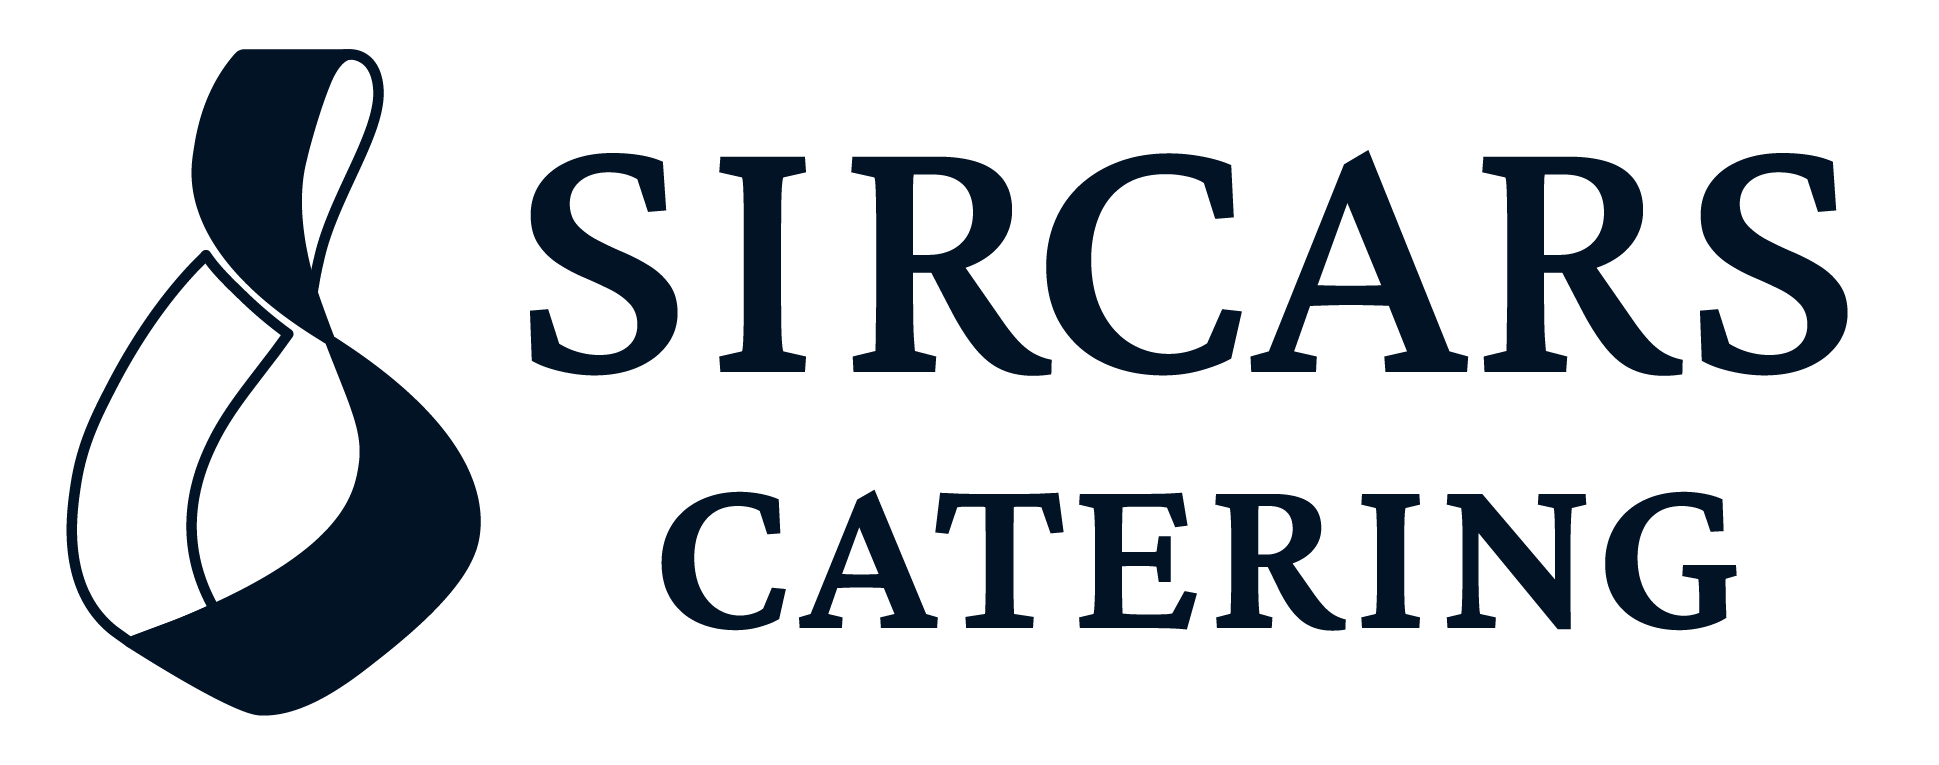 SIRCARS CATERING